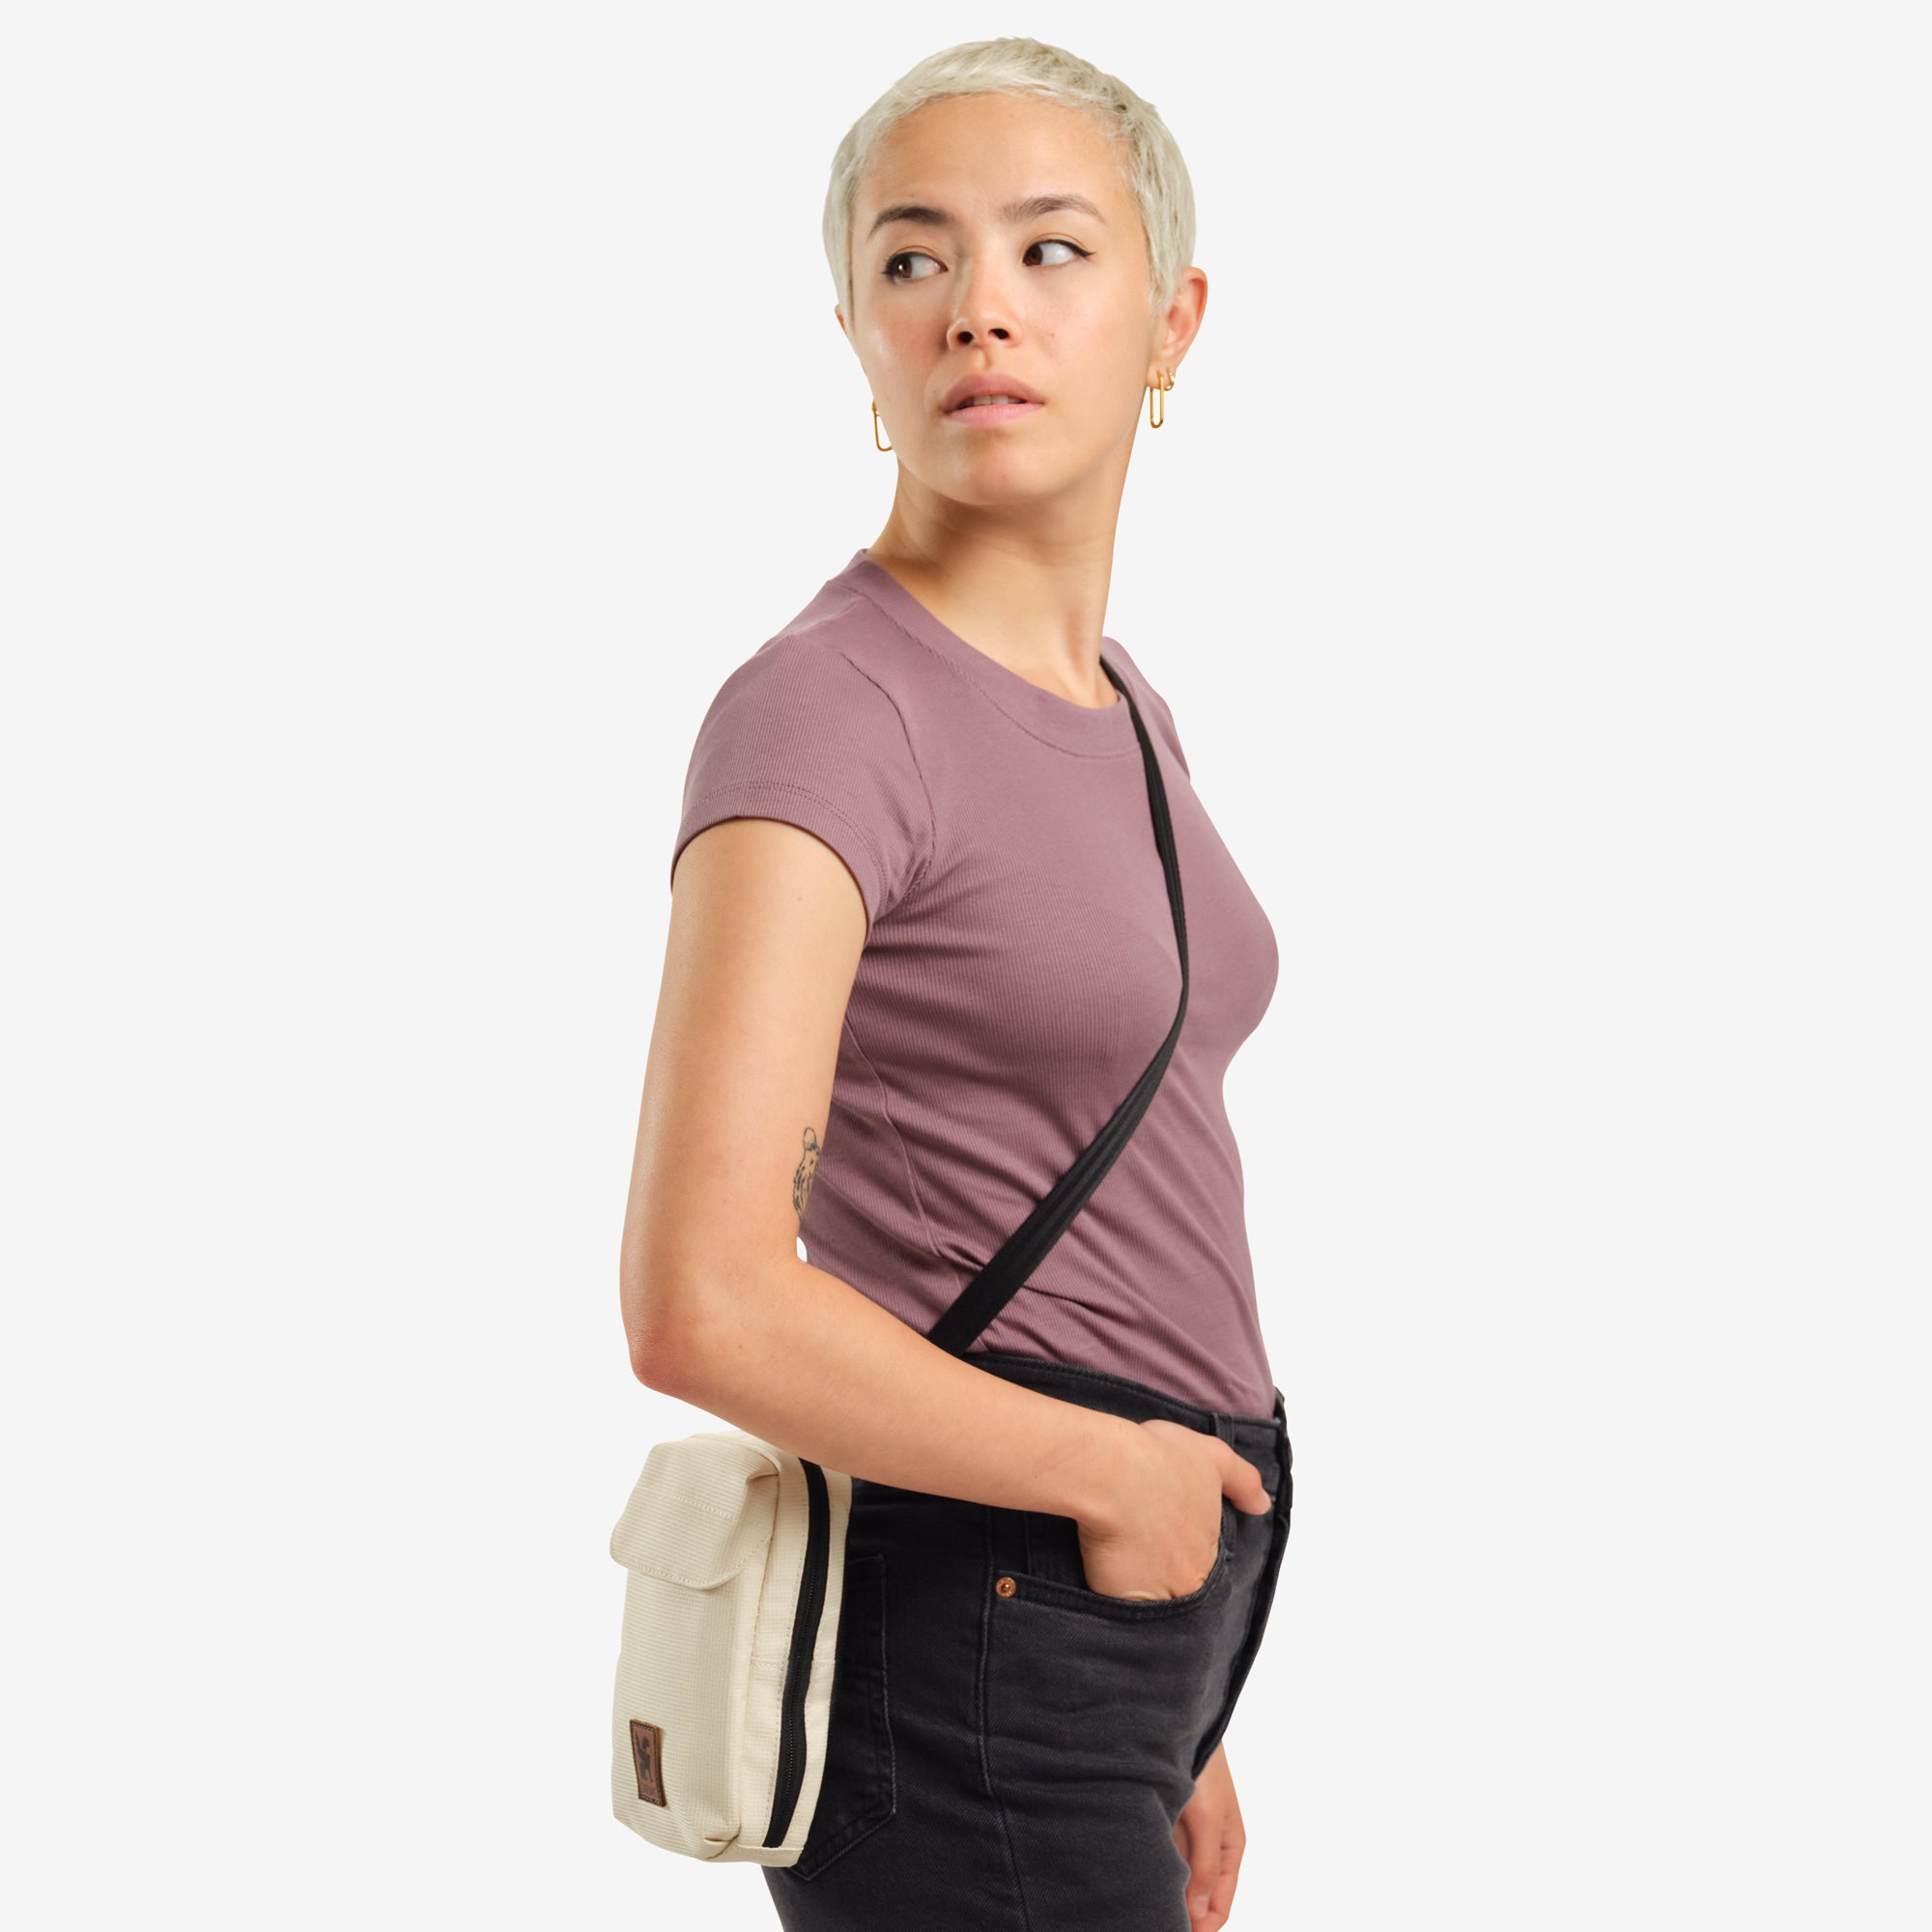 Ruckas Accessory Pouch in natural being worn by a person